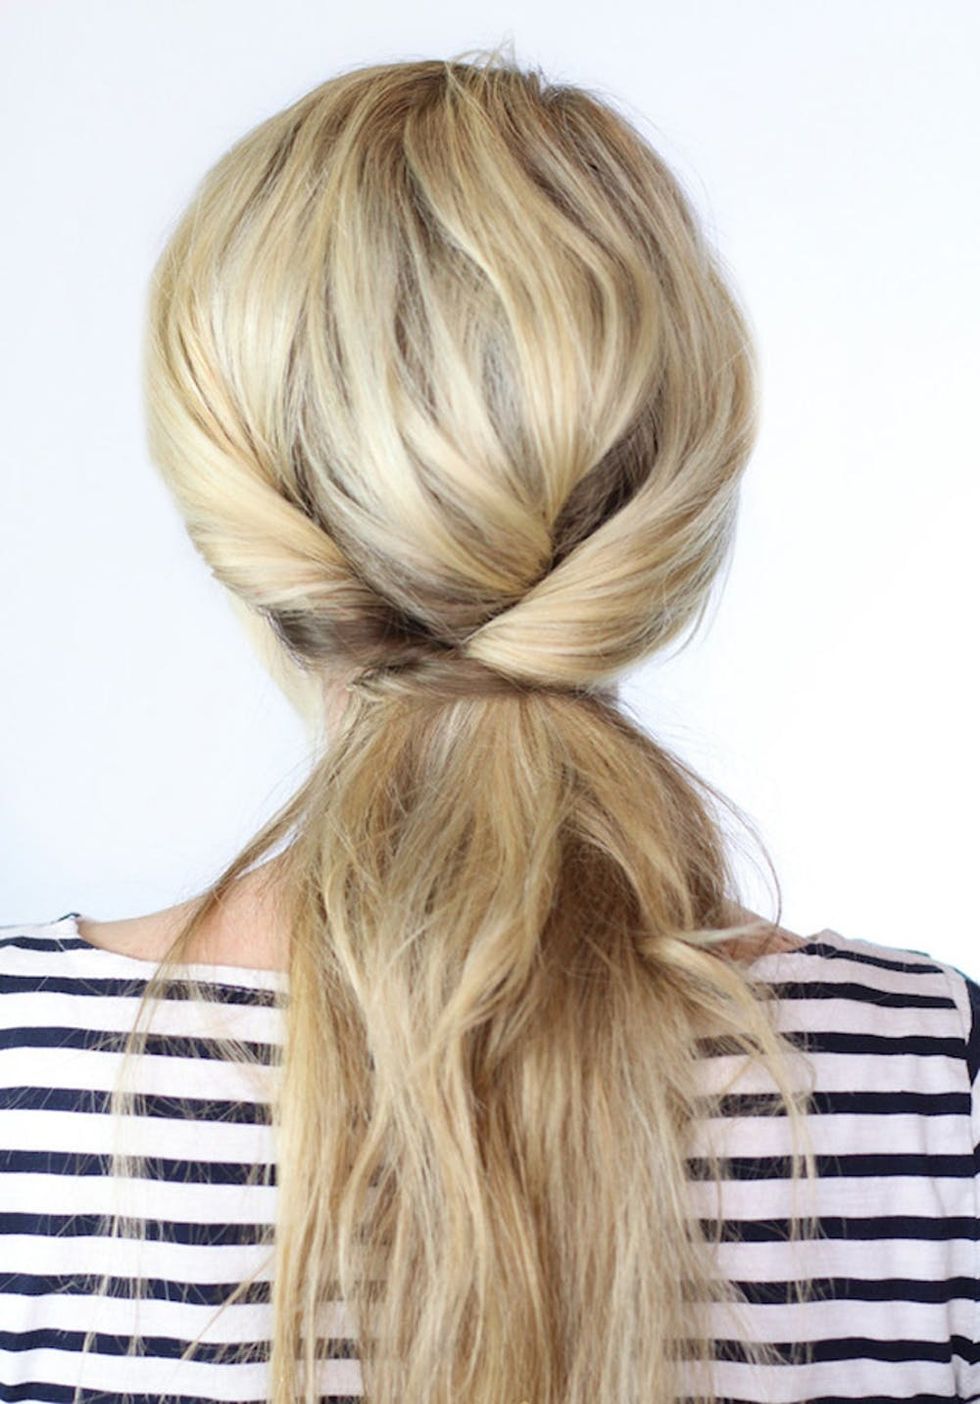 25 5 Minute Hairdos That Will Transform Your Morning Routine